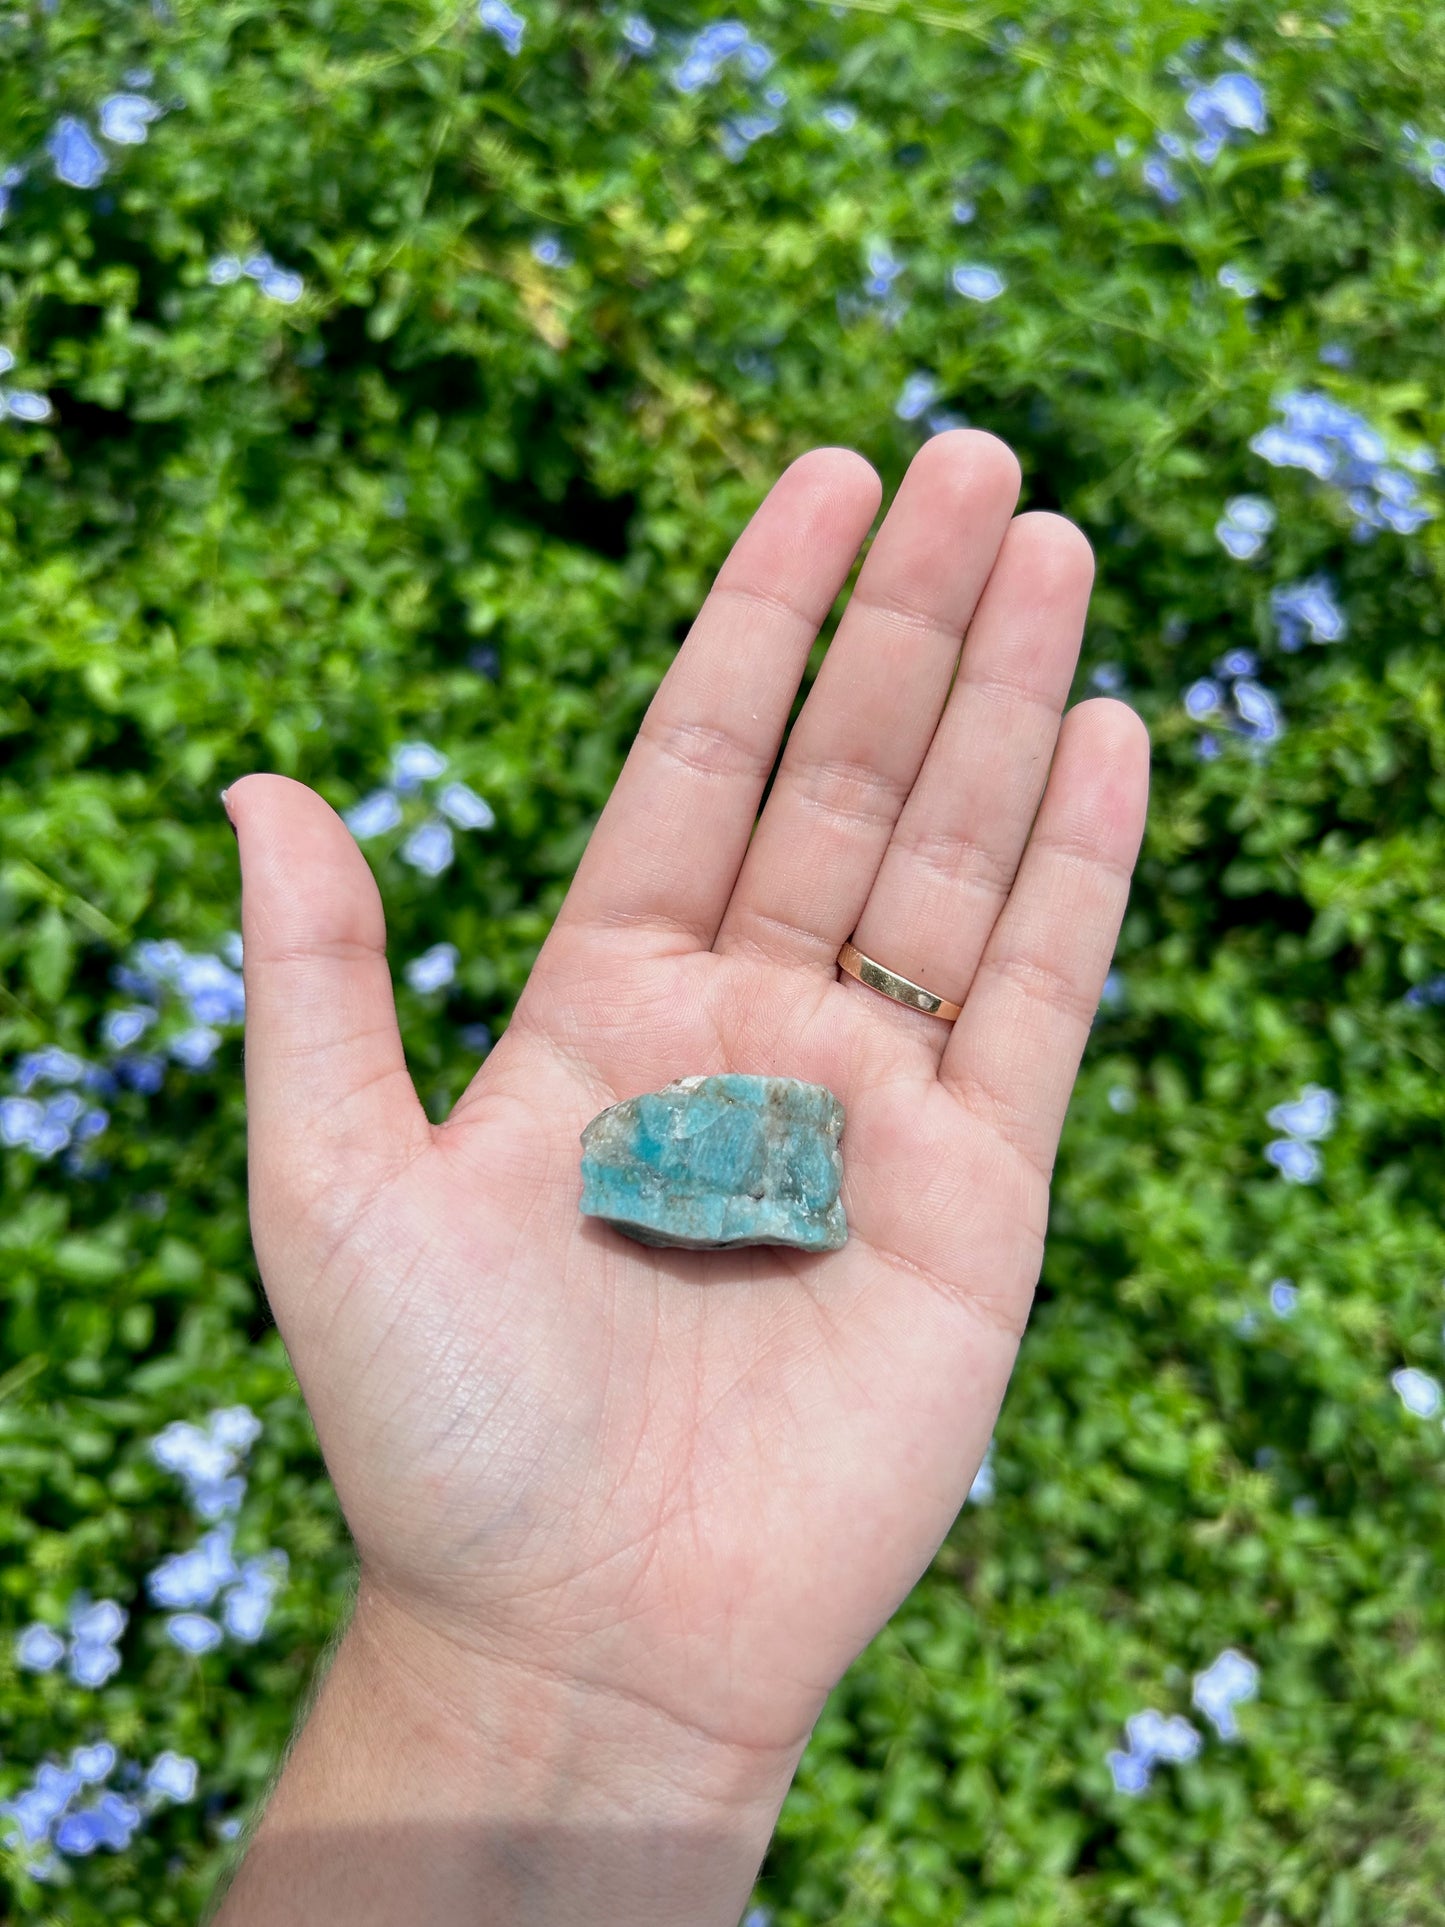 amazonite stone being held in hand. 0.5 oz. background is outside with leaves and blue flowers. 